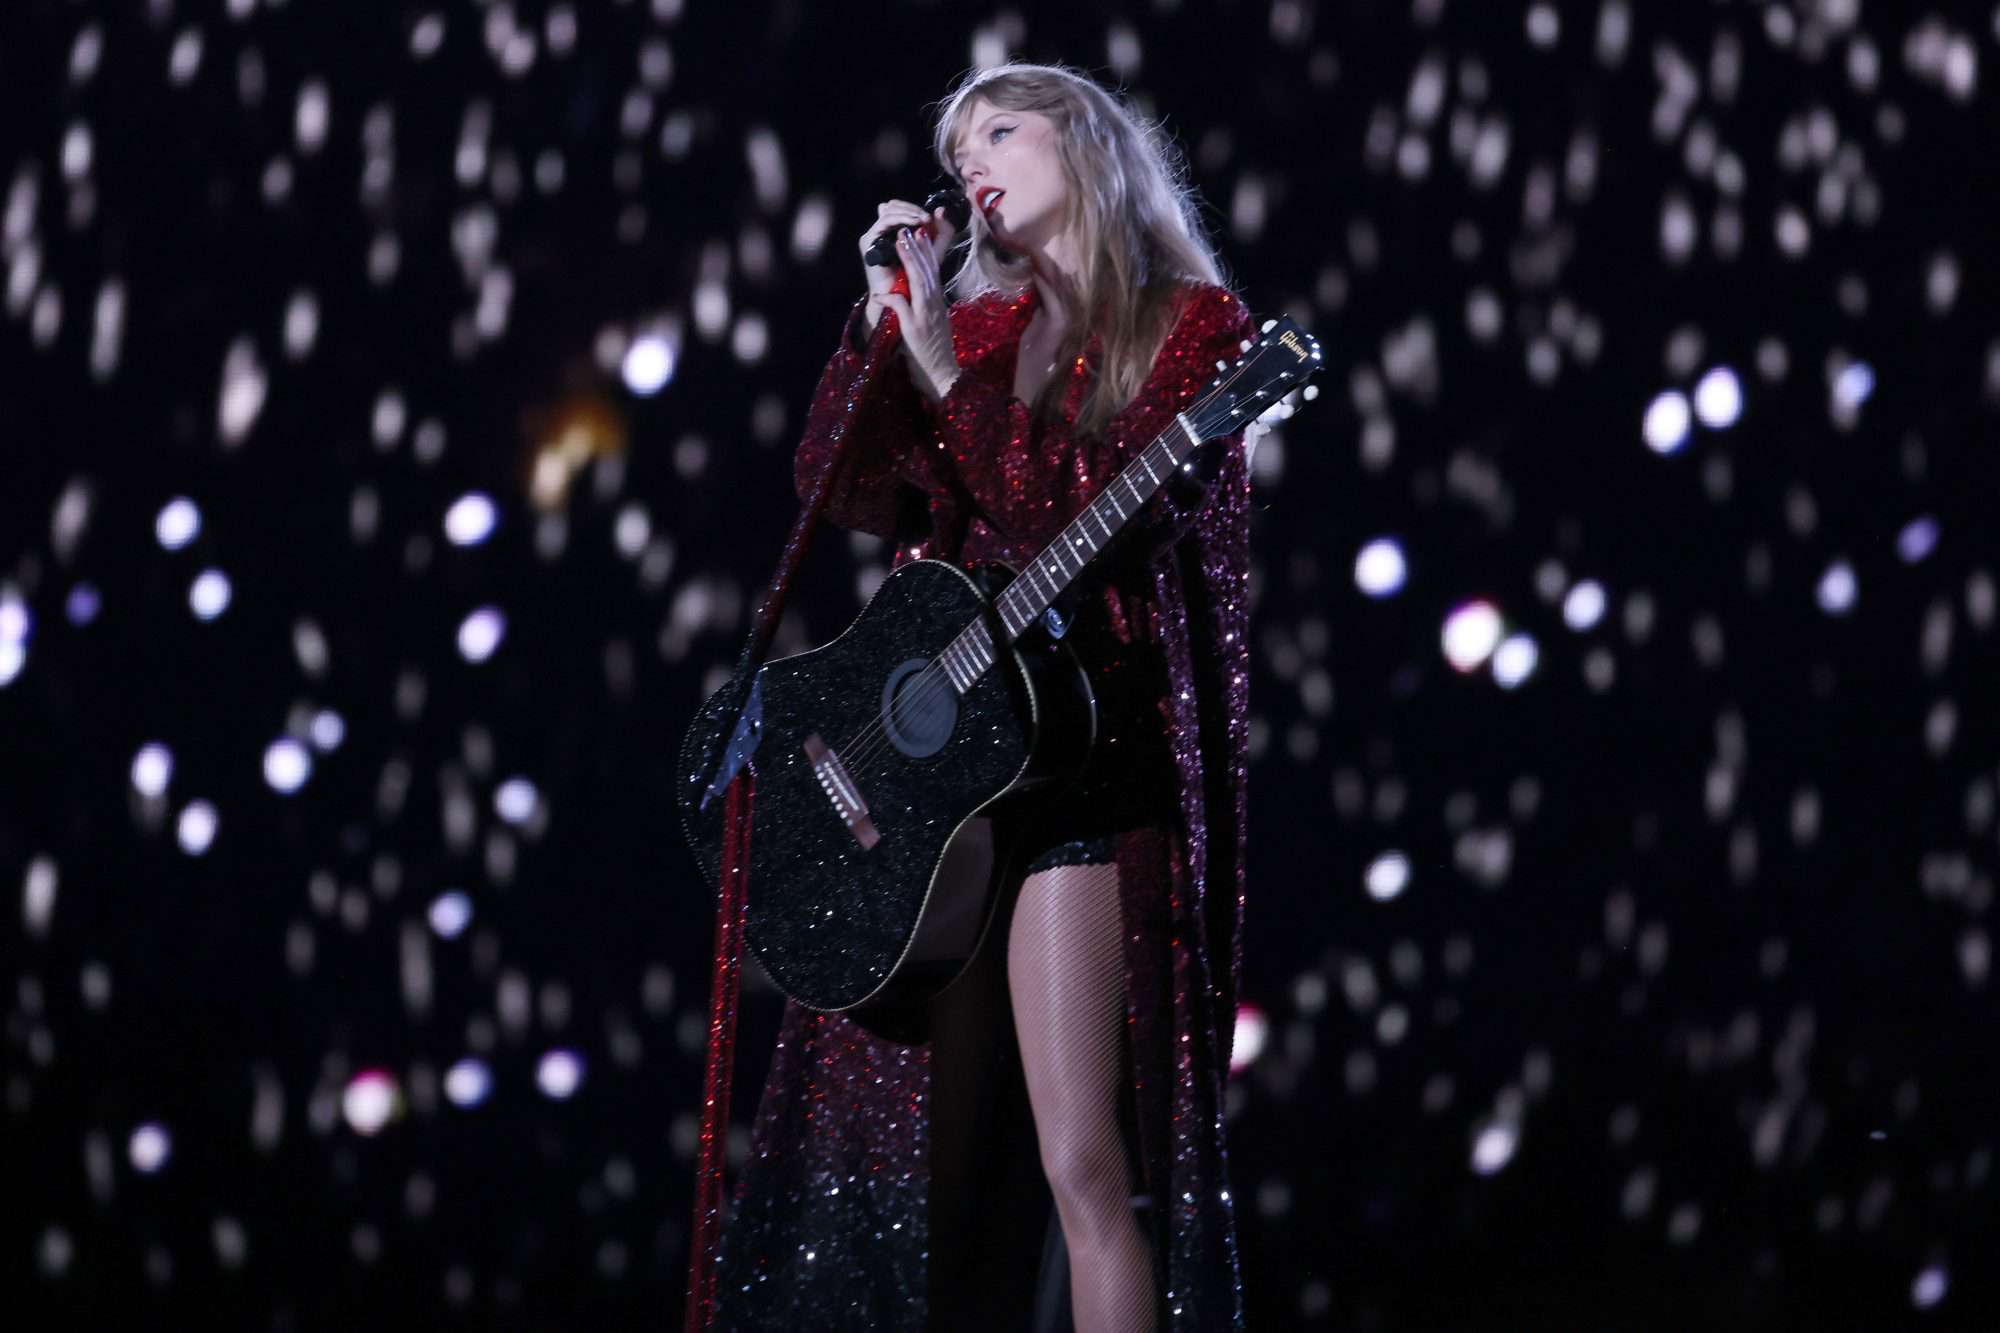 NASHVILLE, TENNESSEE - MAY 05: EDITORIAL USE ONLY Taylor Swift performs onstage during night one of Taylor Swift | The Eras Tour at Nissan Stadium on May 05, 2023 in Nashville, Tennessee. (Photo by John Shearer/TAS23/Getty Images for TAS Rights Management)